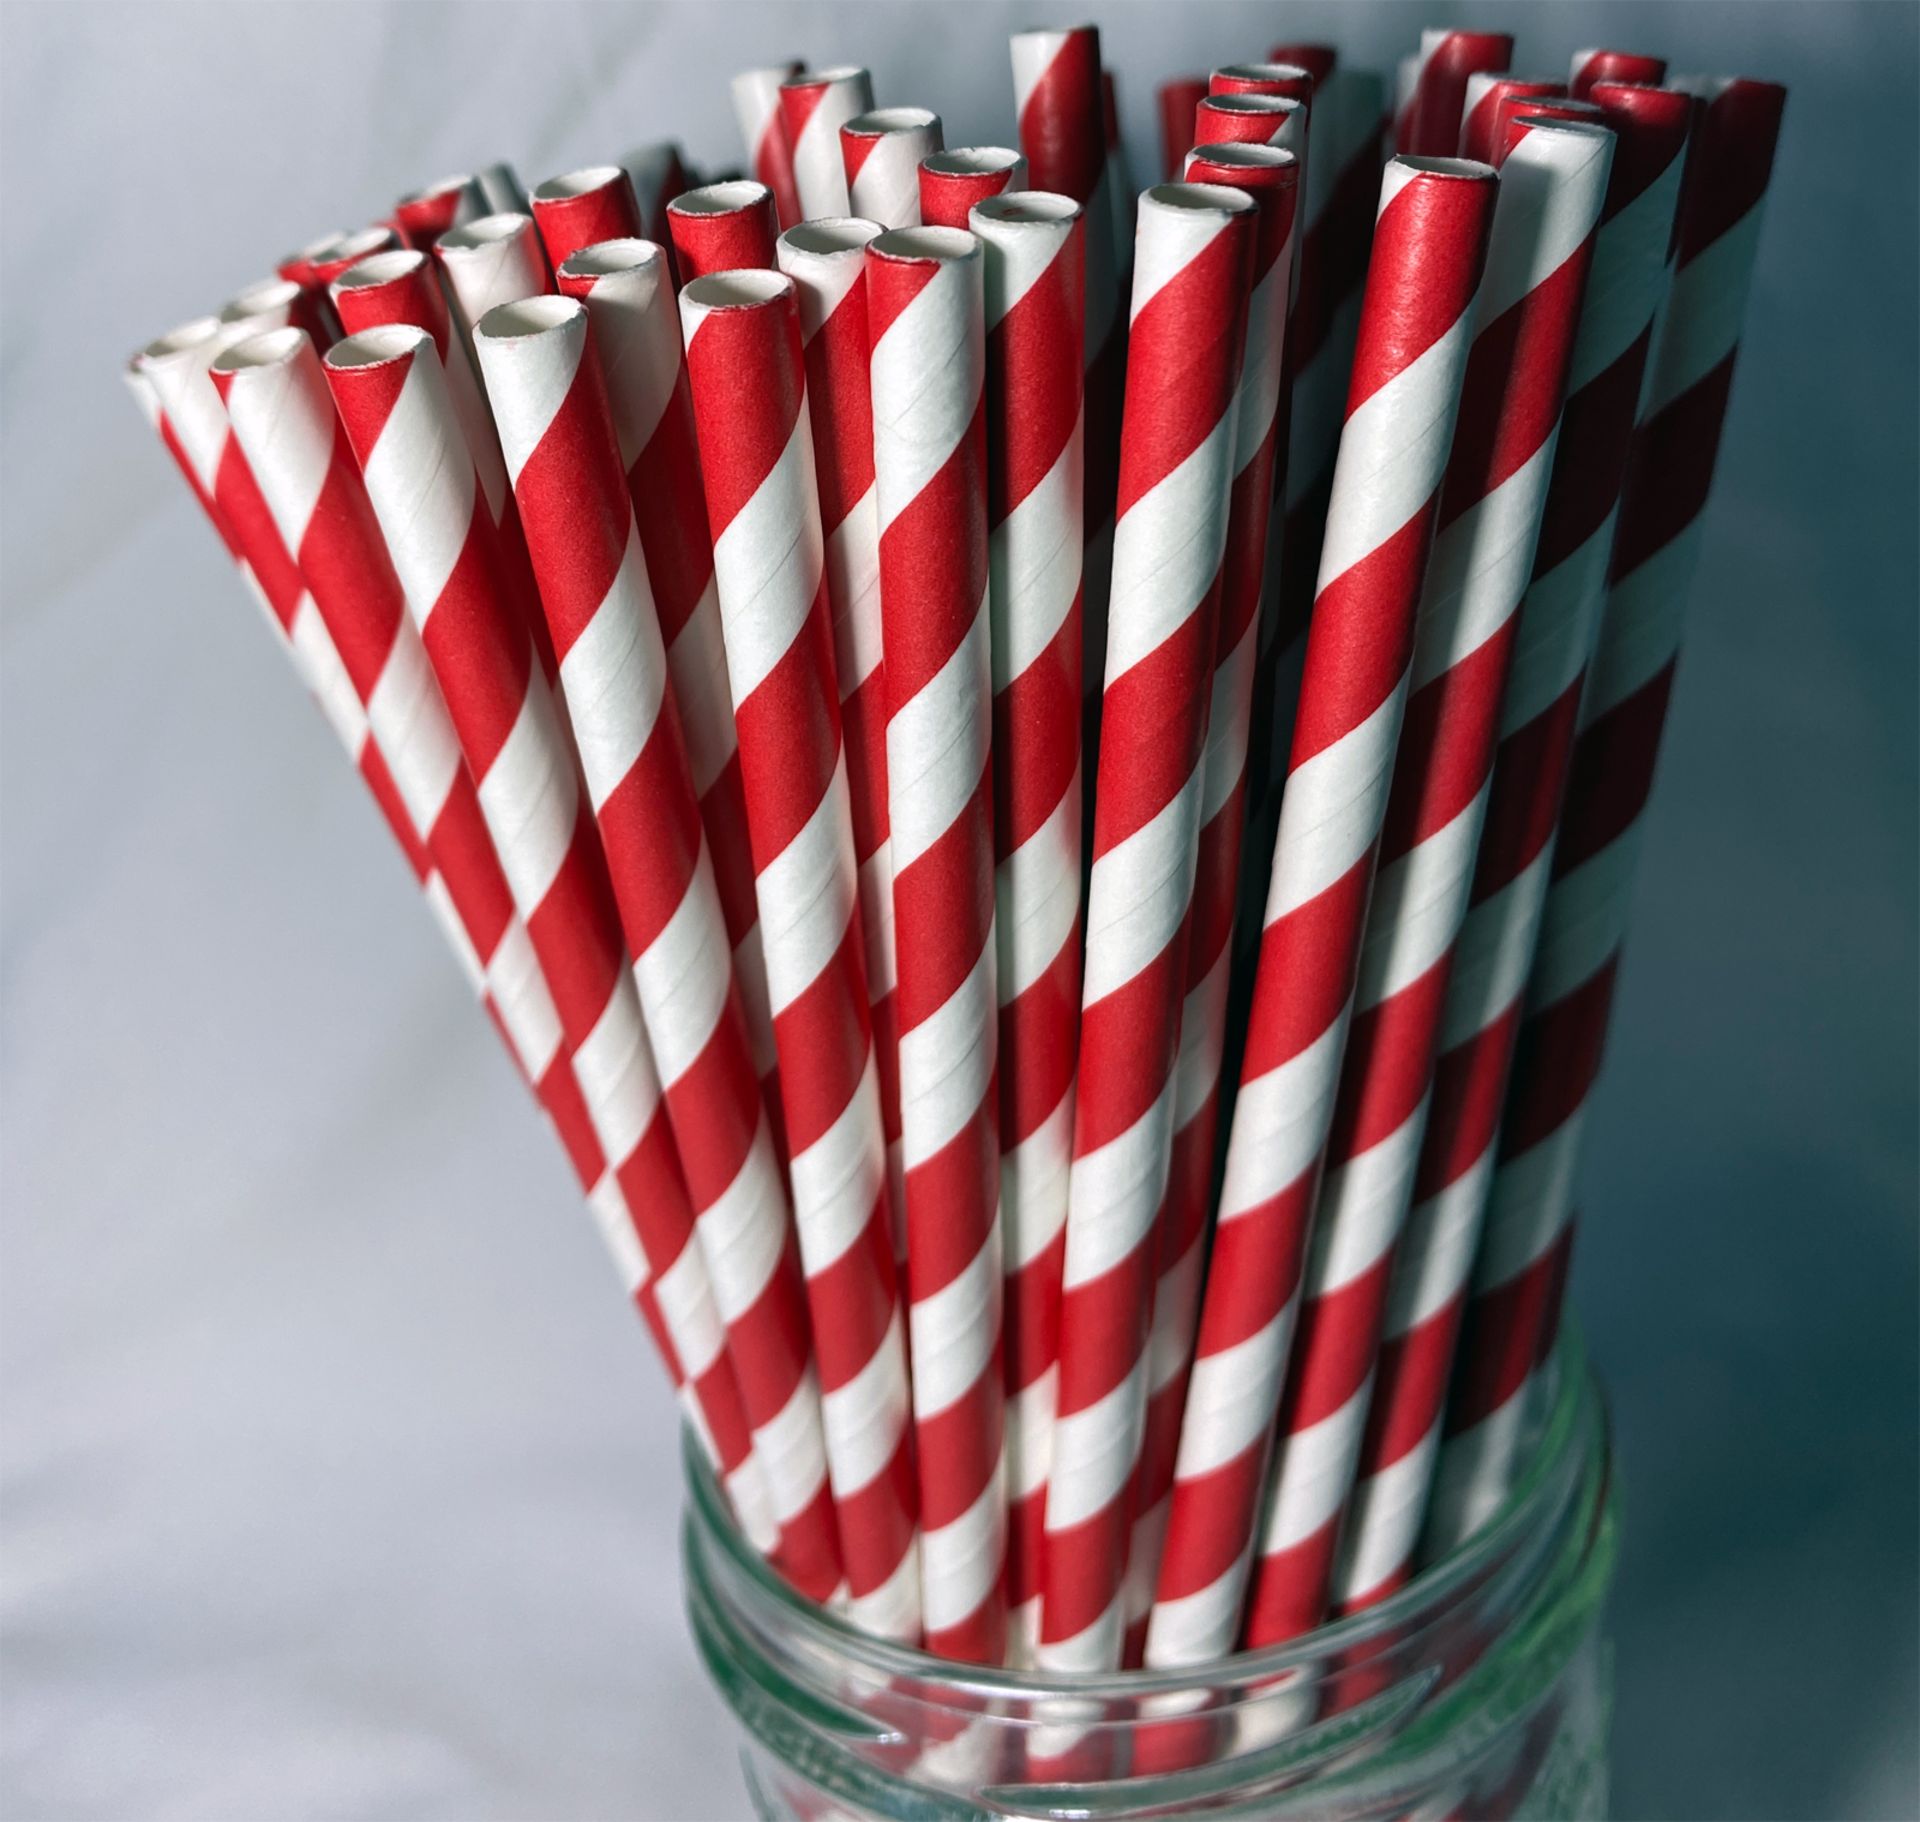 5 x Boxes of Candy Twist Paper Straws by 888 Gastro Disposables - Image 3 of 3